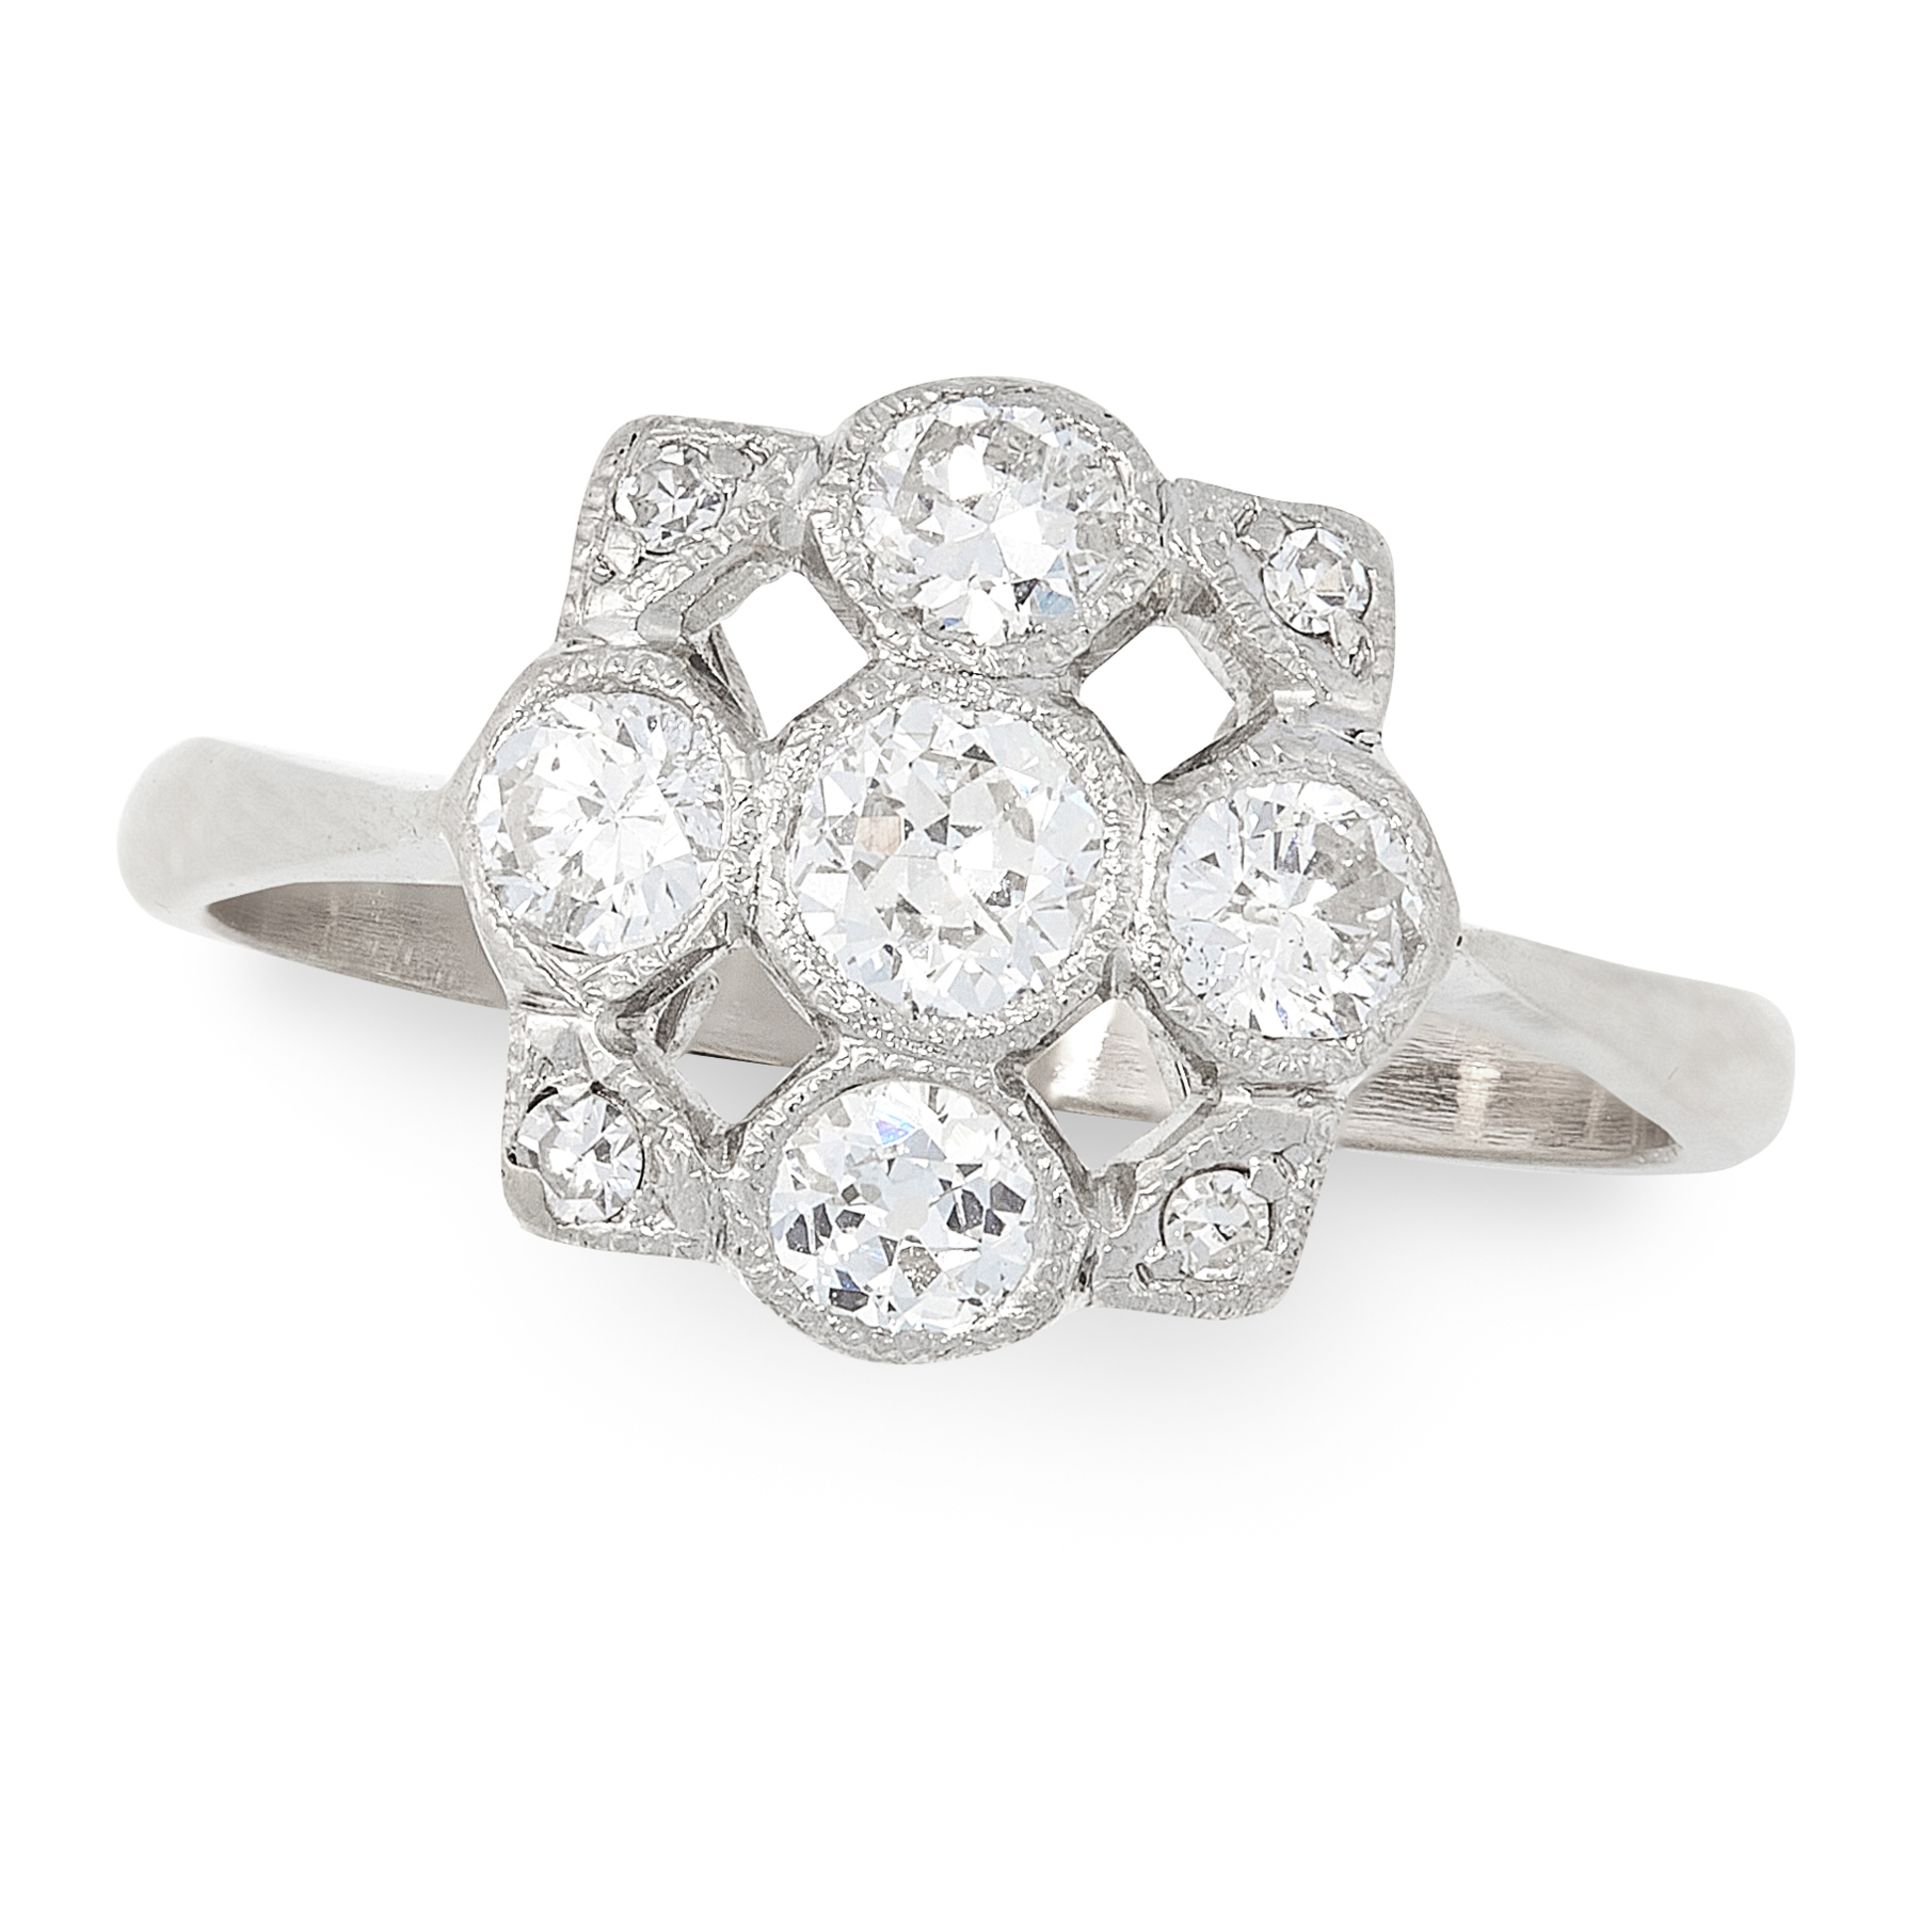 A DIAMOND DRESS RING in white gold, the openwork face set with a cluster of five old and round cut